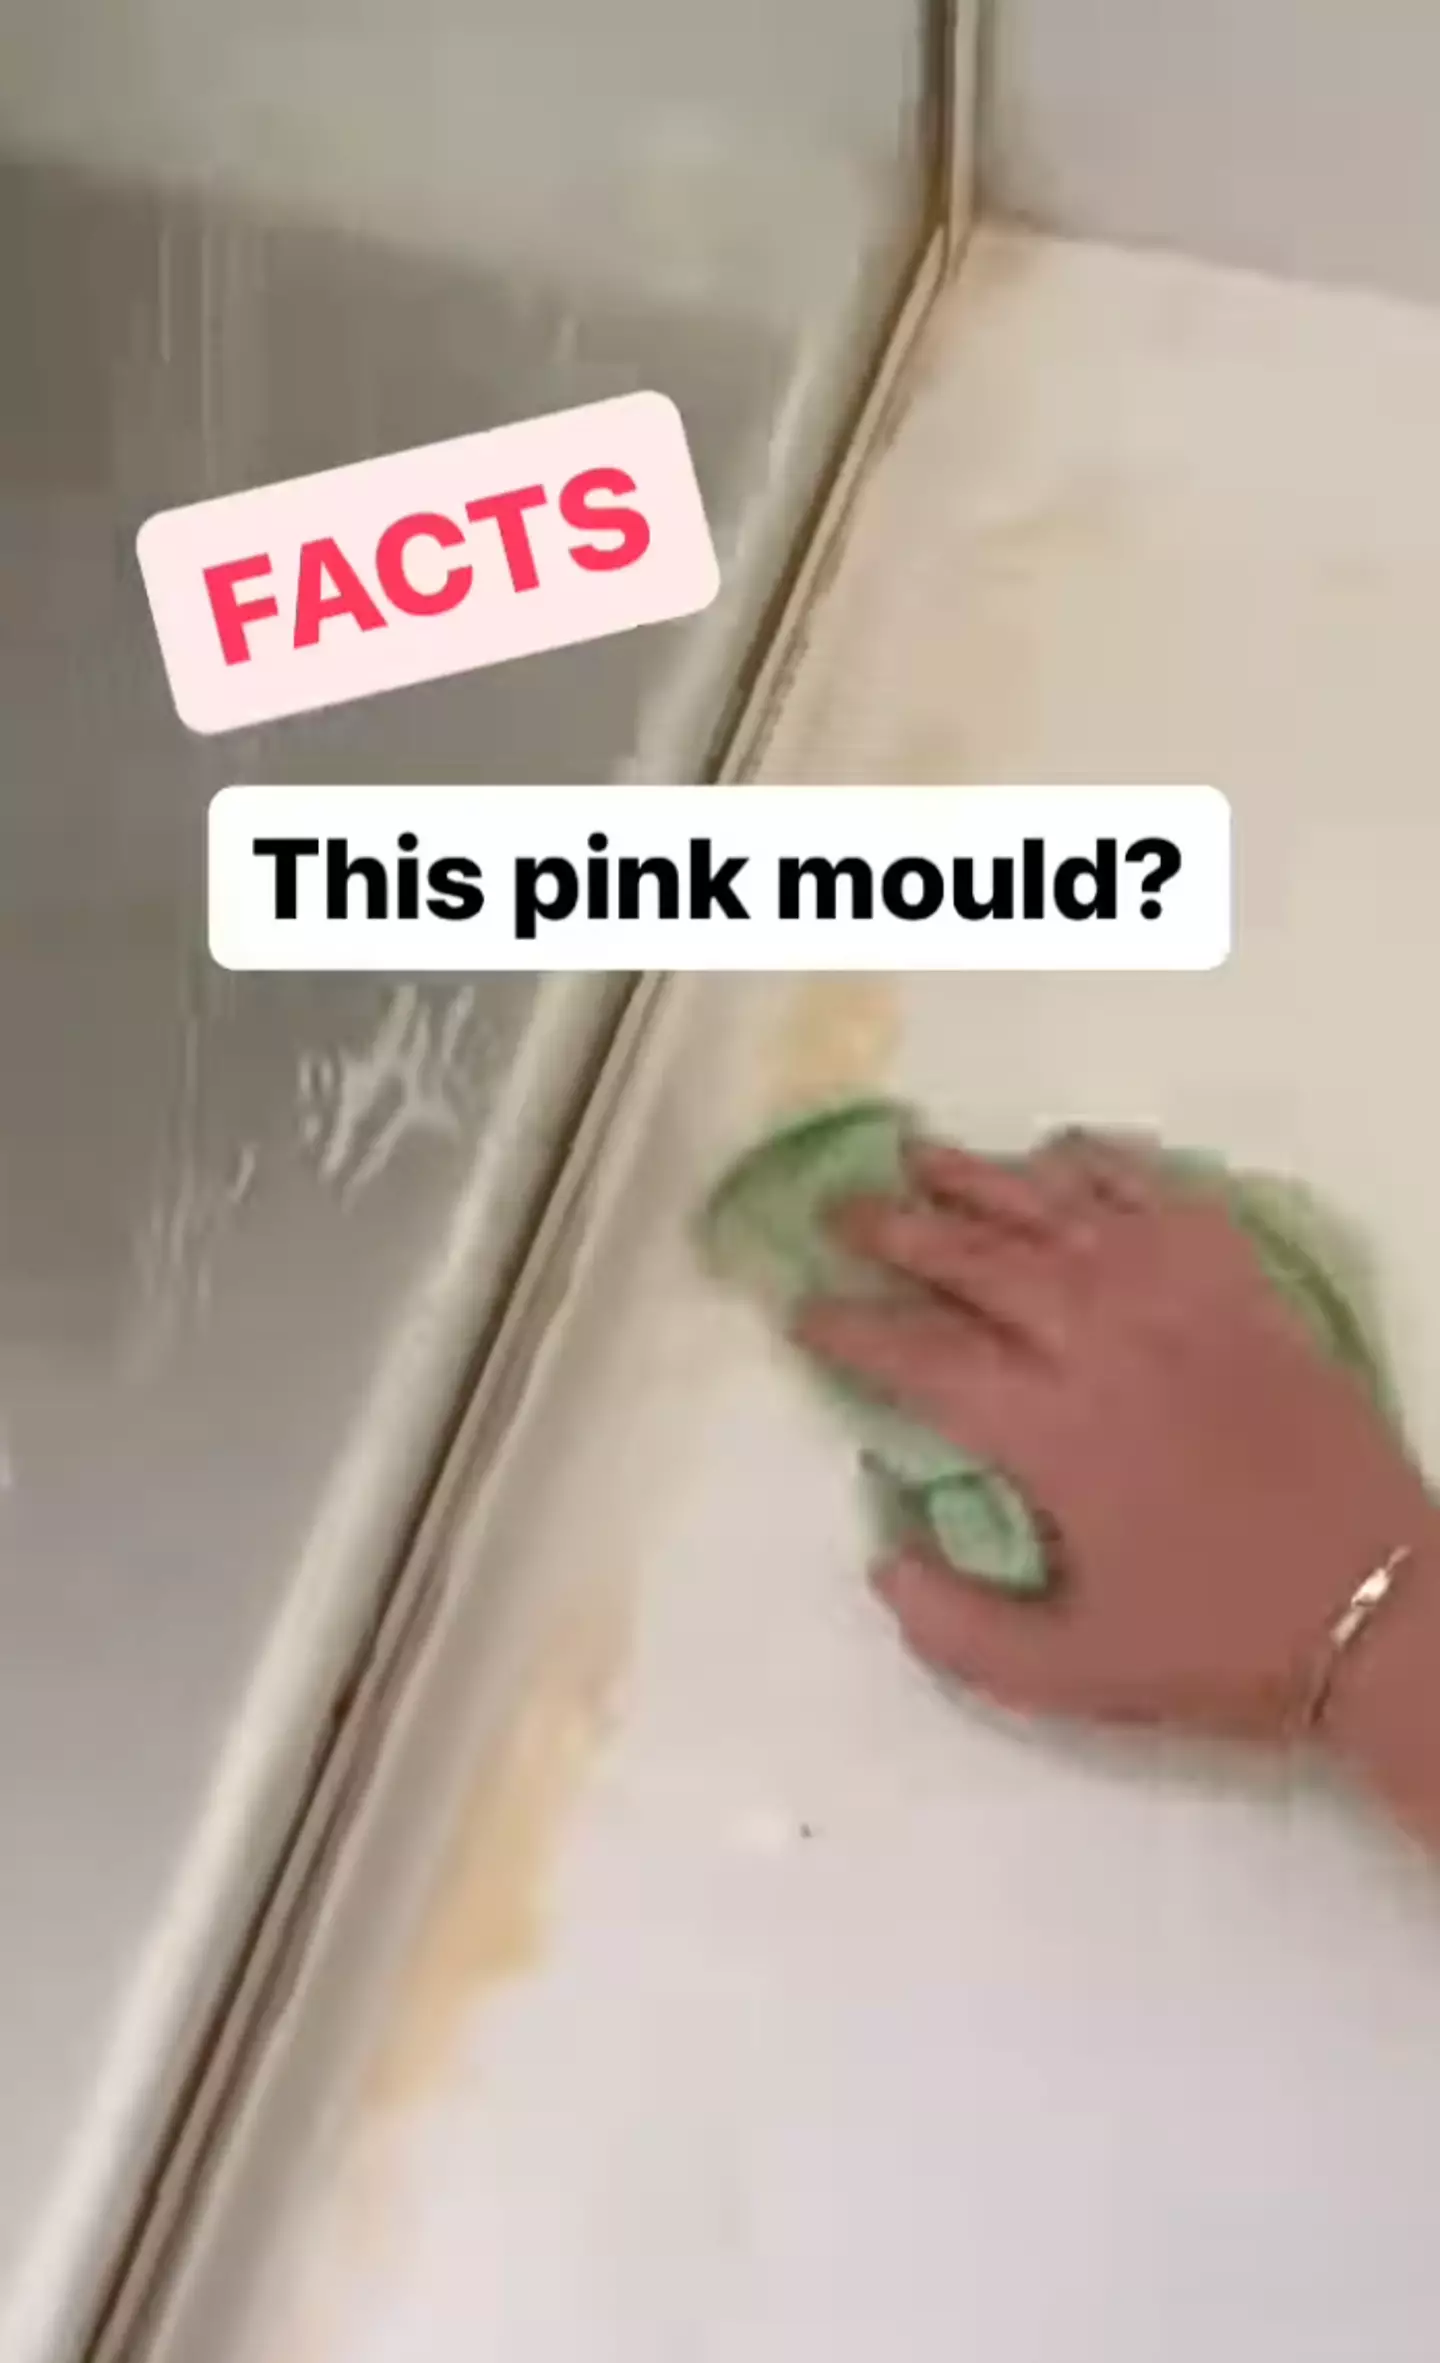 Kacie Stephens said the pink mould isn't actually mould after all.